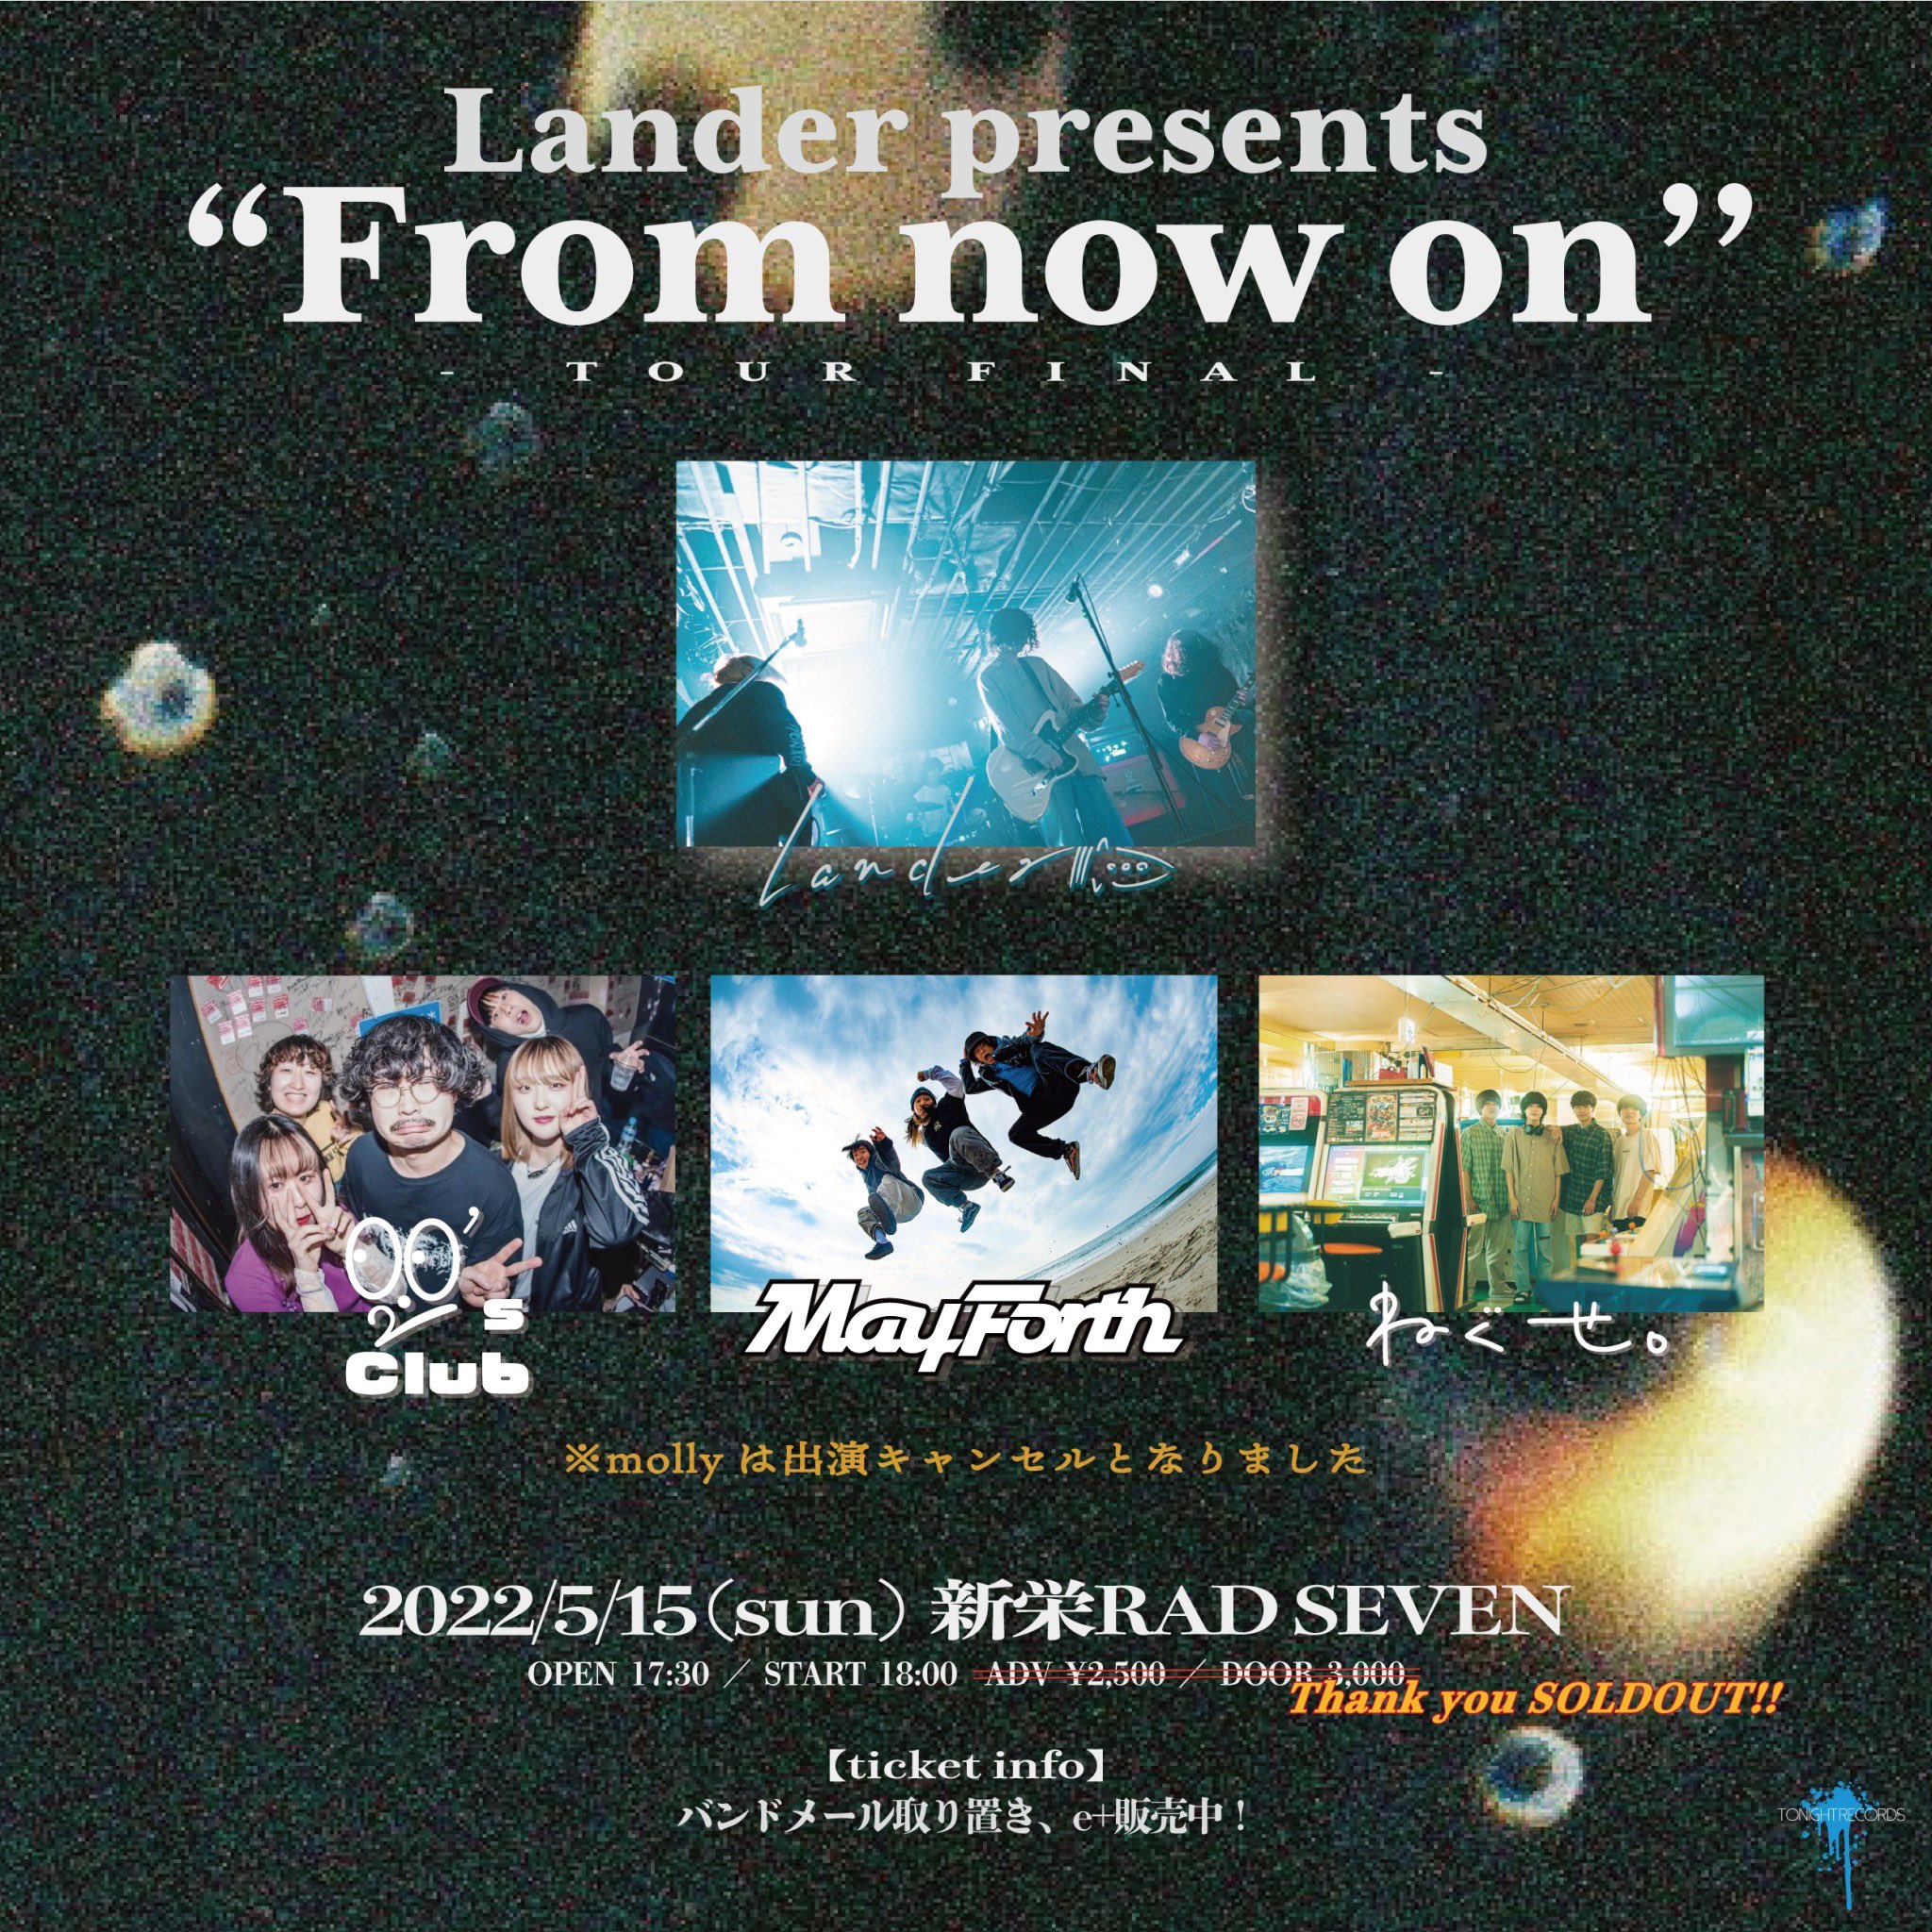 Lander presents "From now on"